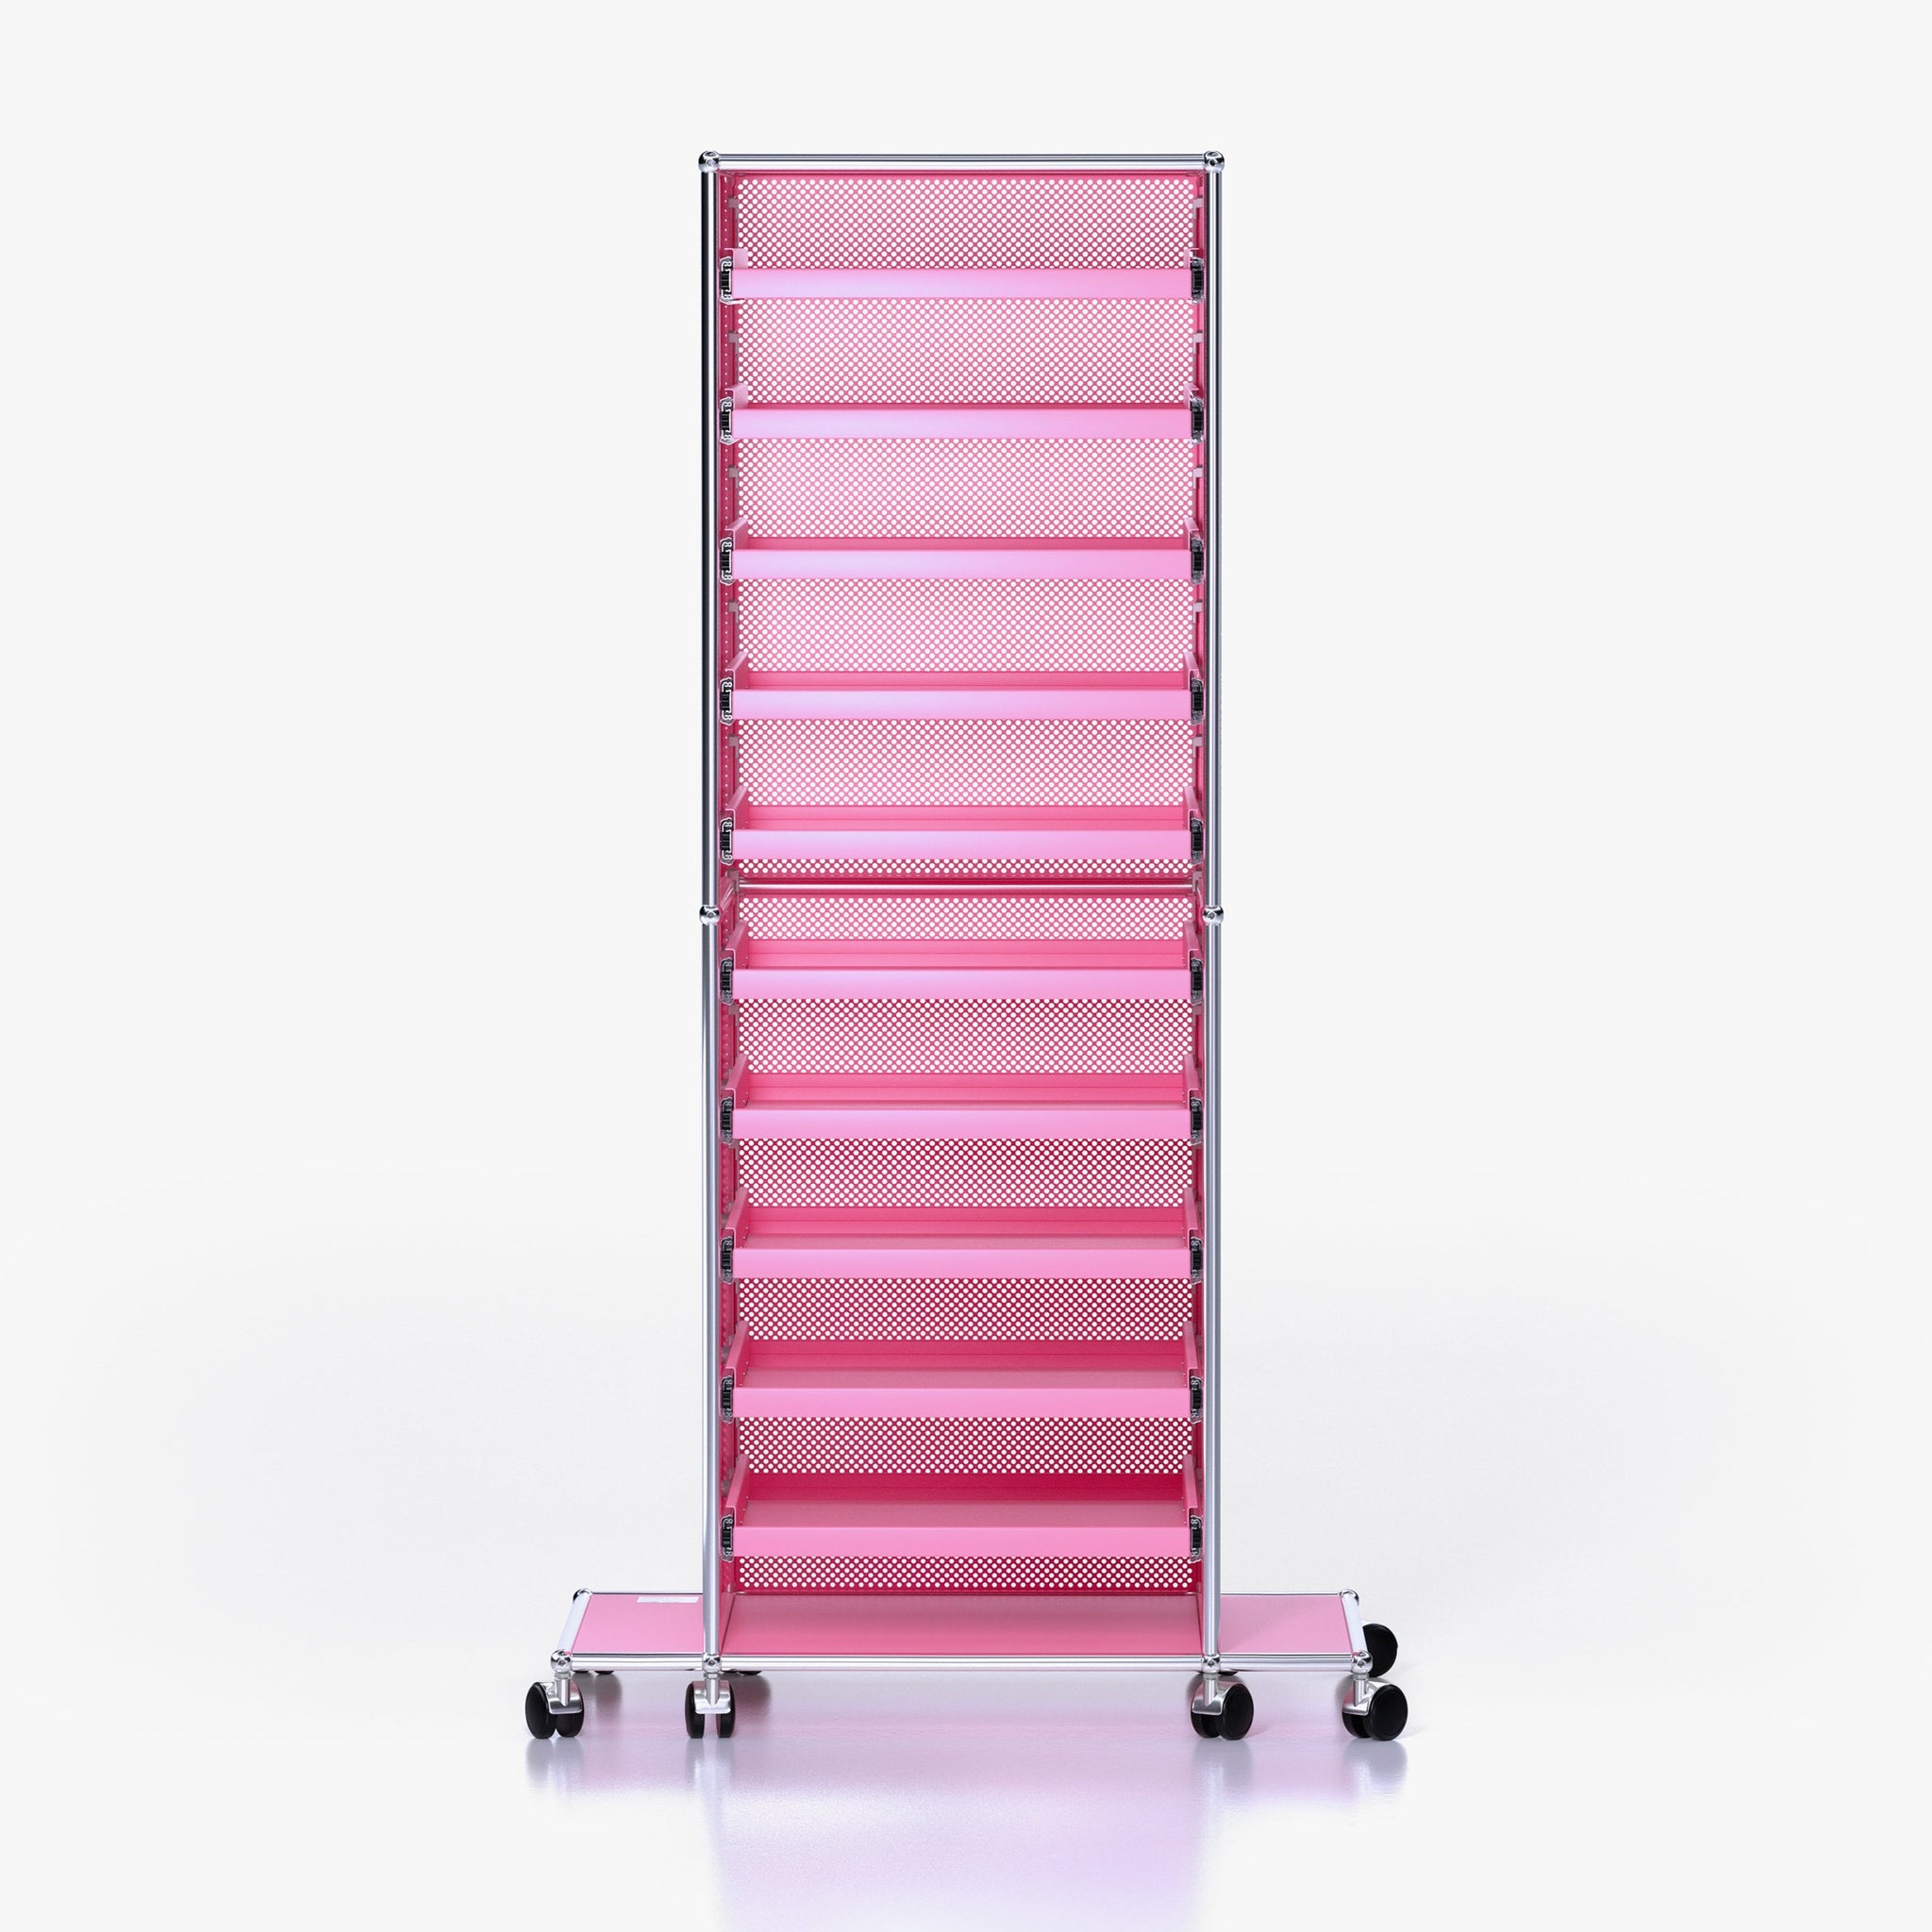 Tower B (Archive): Rolling Tower Shelf in Downtown Pink (Front View)